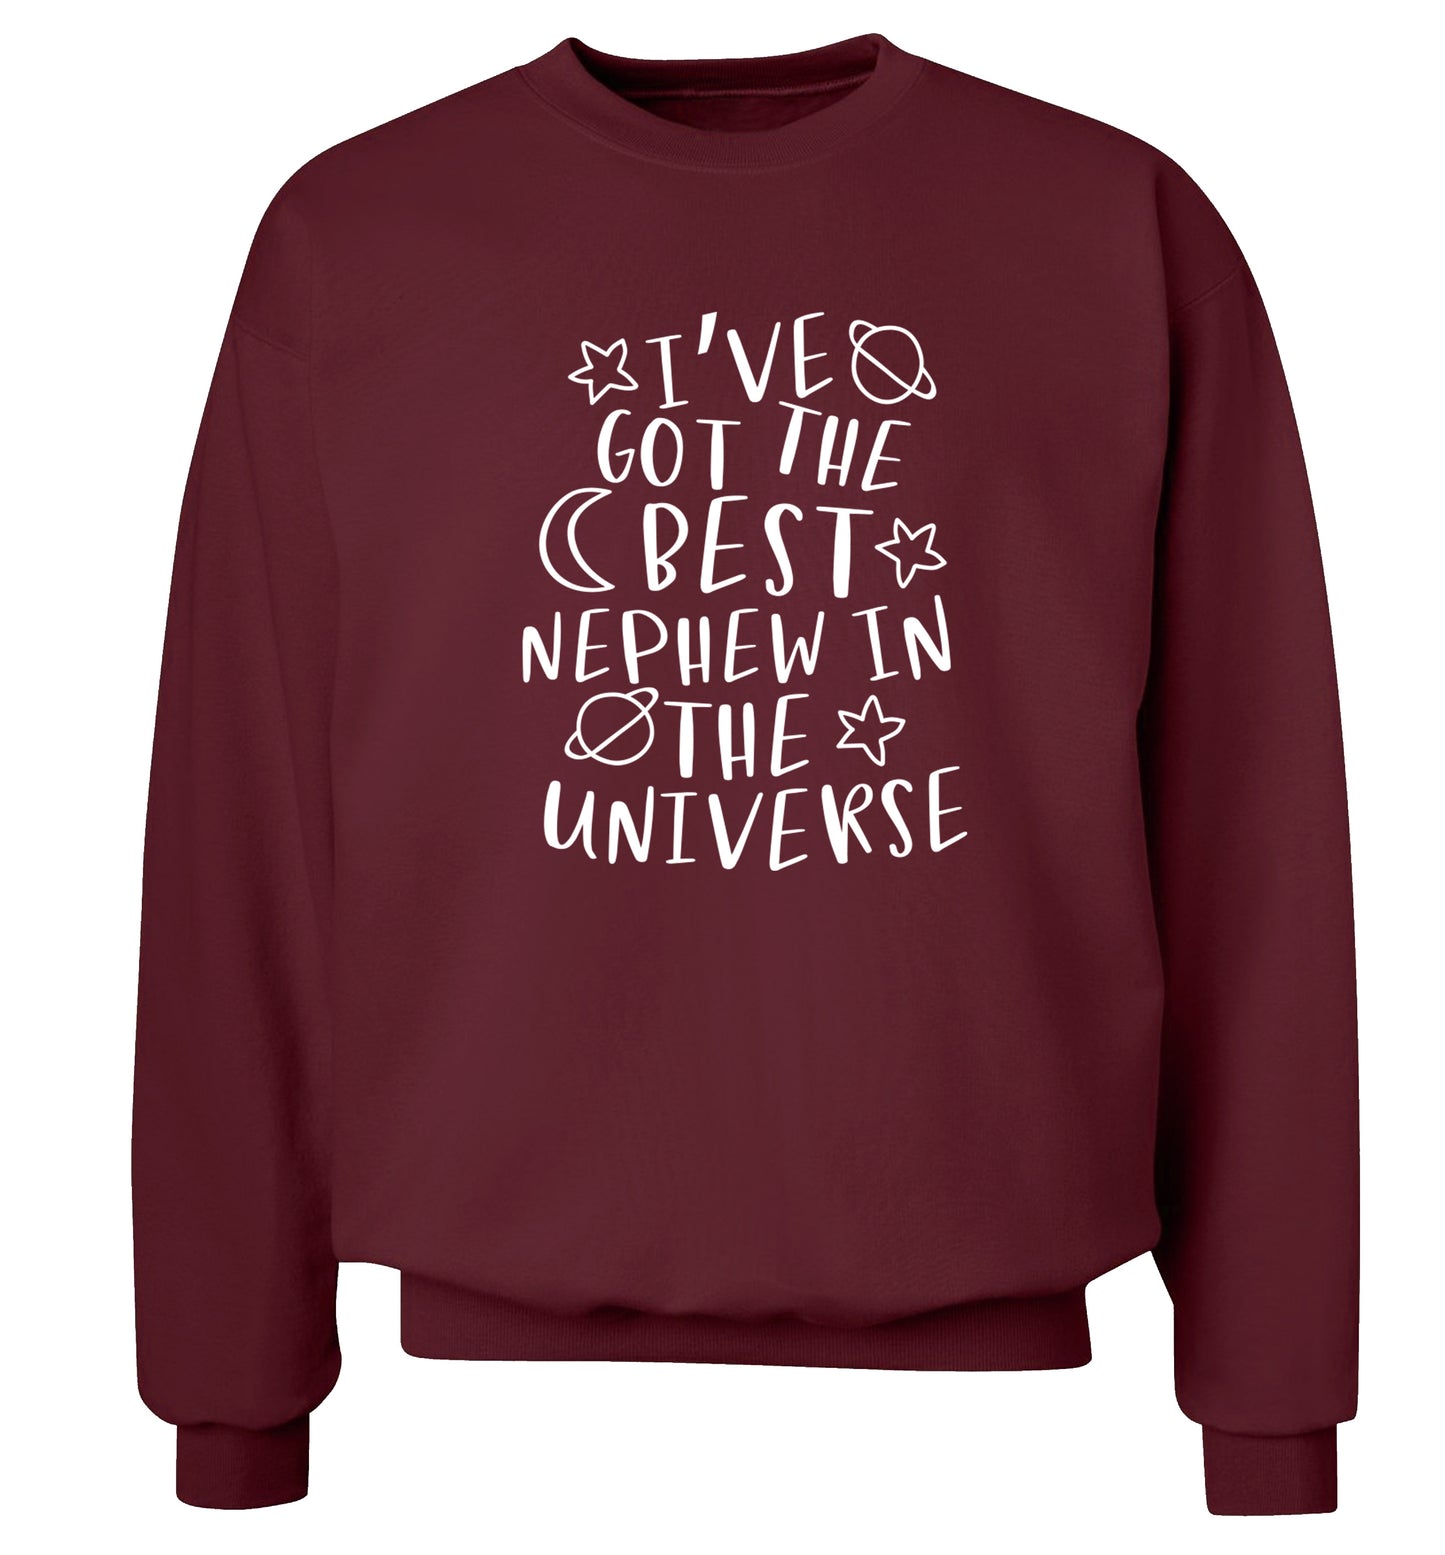 I've got the best nephew in the universe Adult's unisex maroon Sweater 2XL